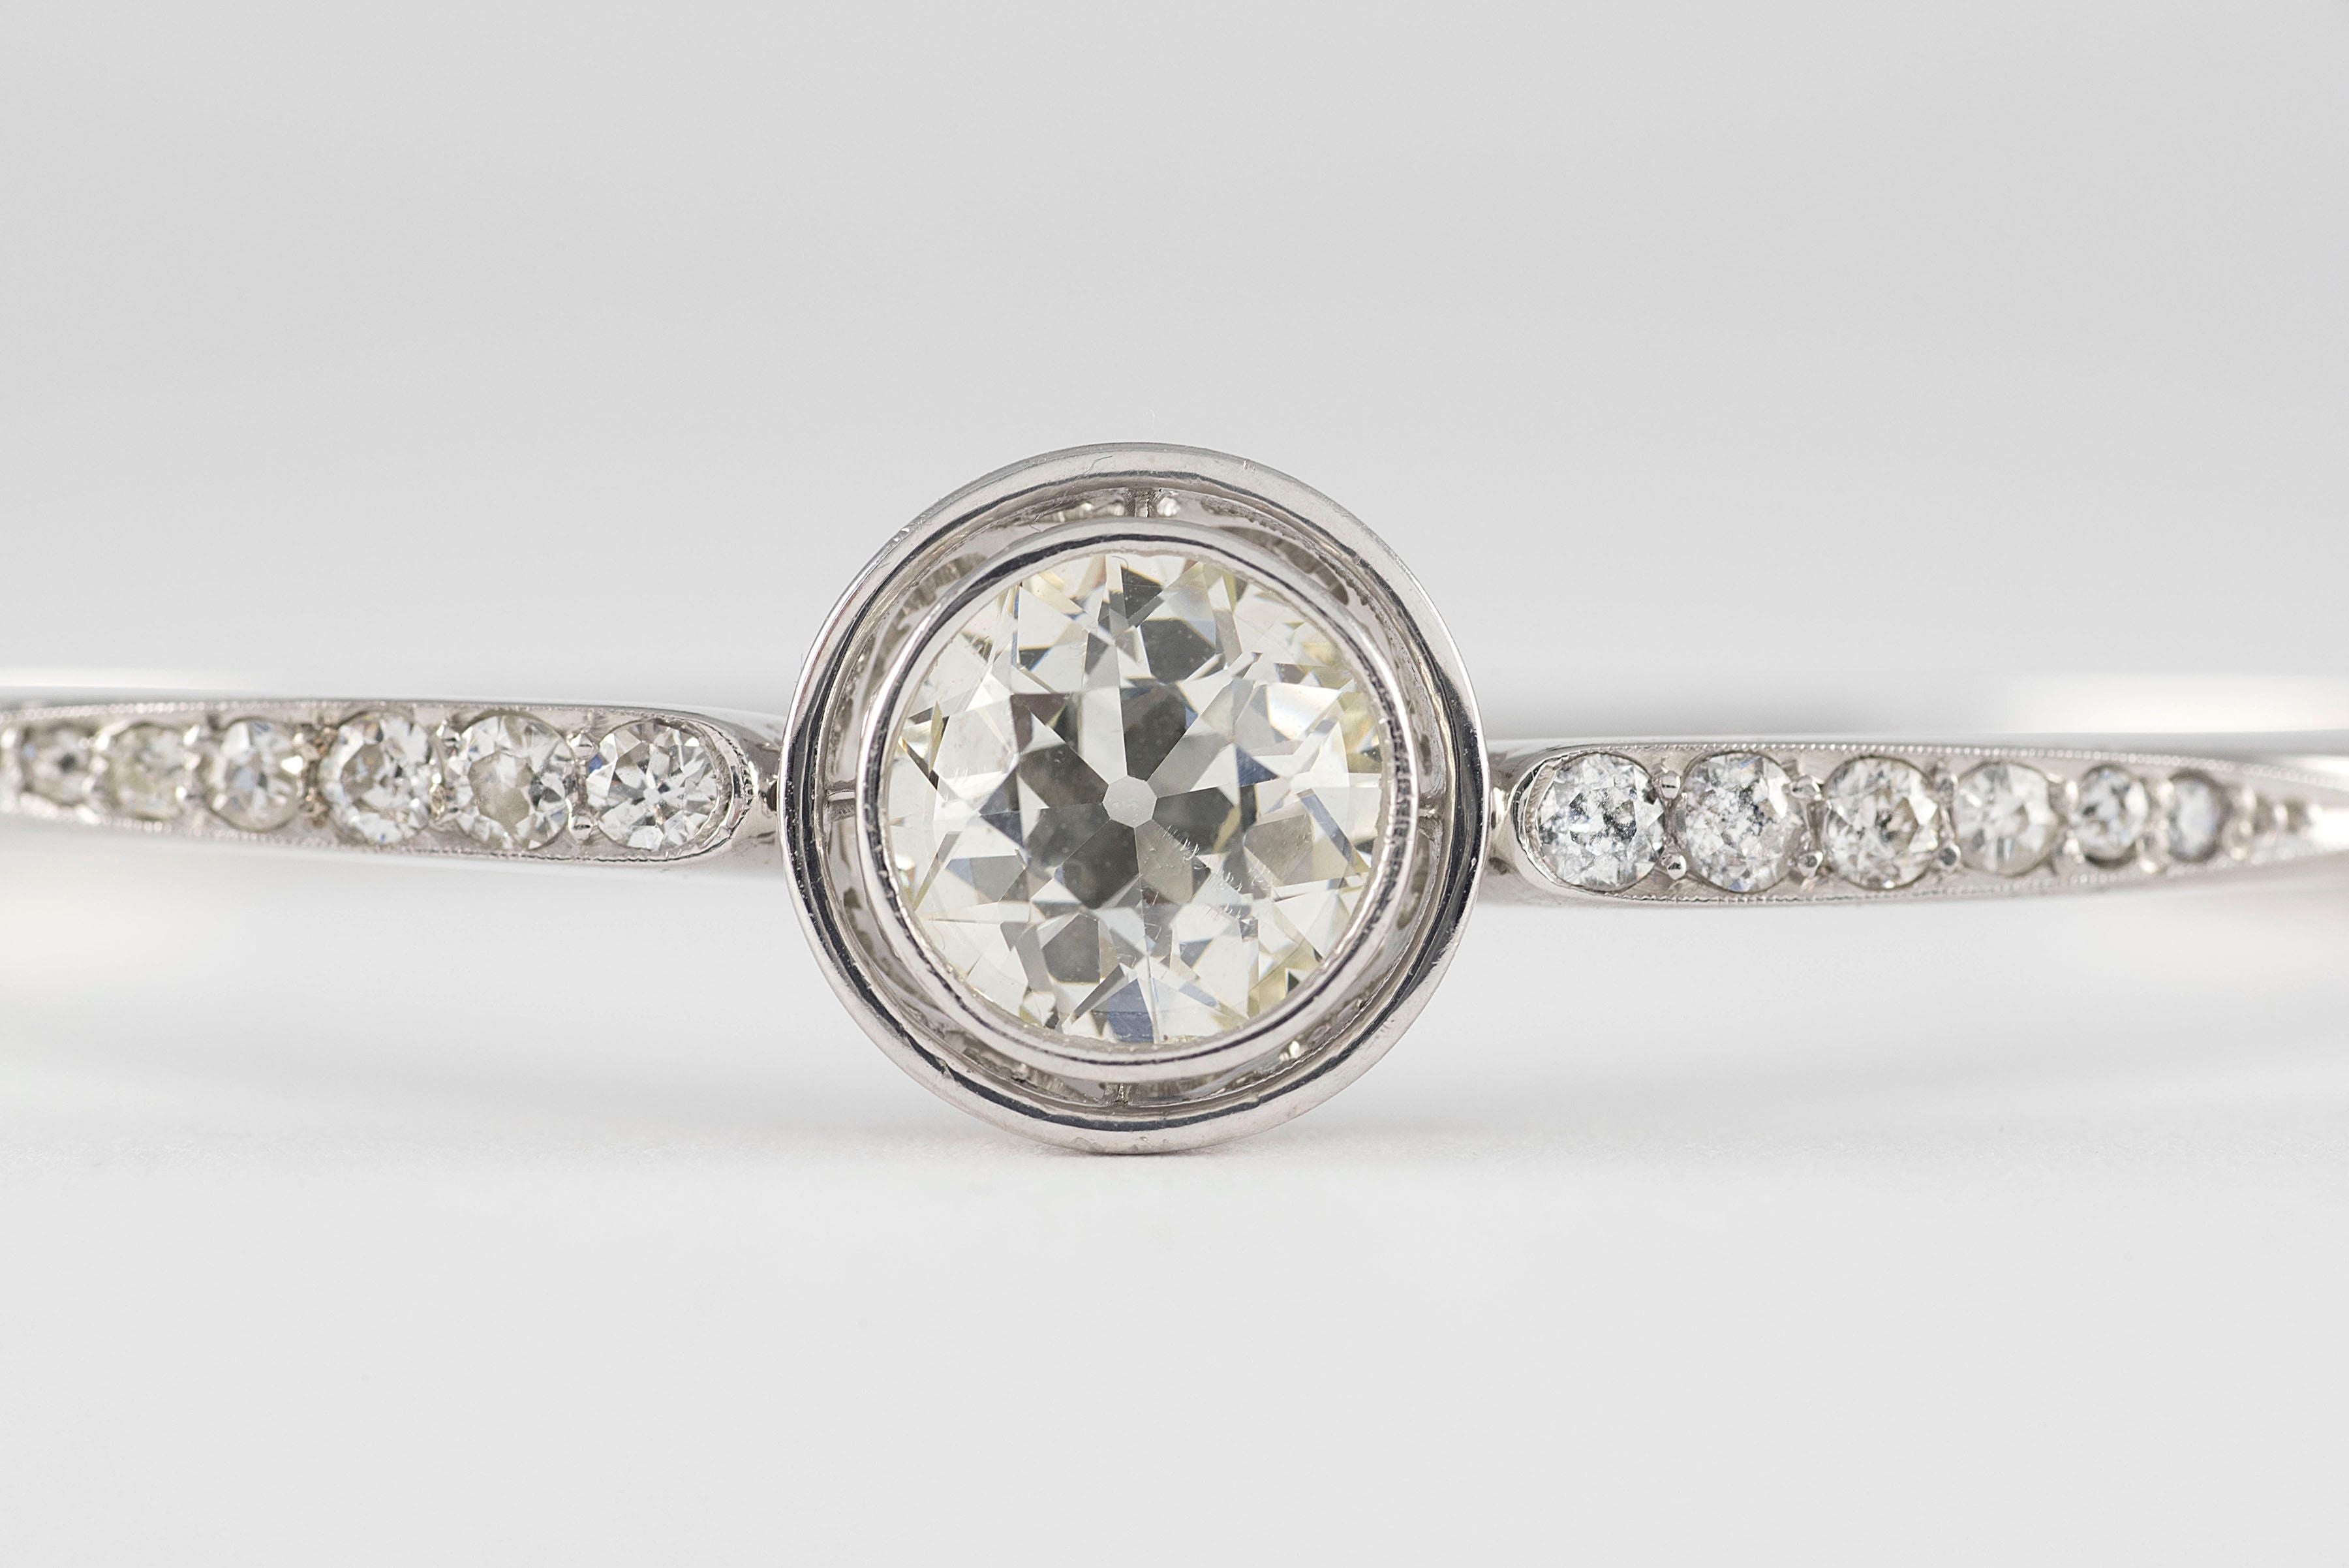 An Old European cut diamond totaling approximately 2.32 carats, K color, SI1 clarity bezel set centers this antique Art Deco bangle bracelet flanked by twelve Old Mine cut diamonds totaling approximately 0.50 carats and handcrafted in 18kt white